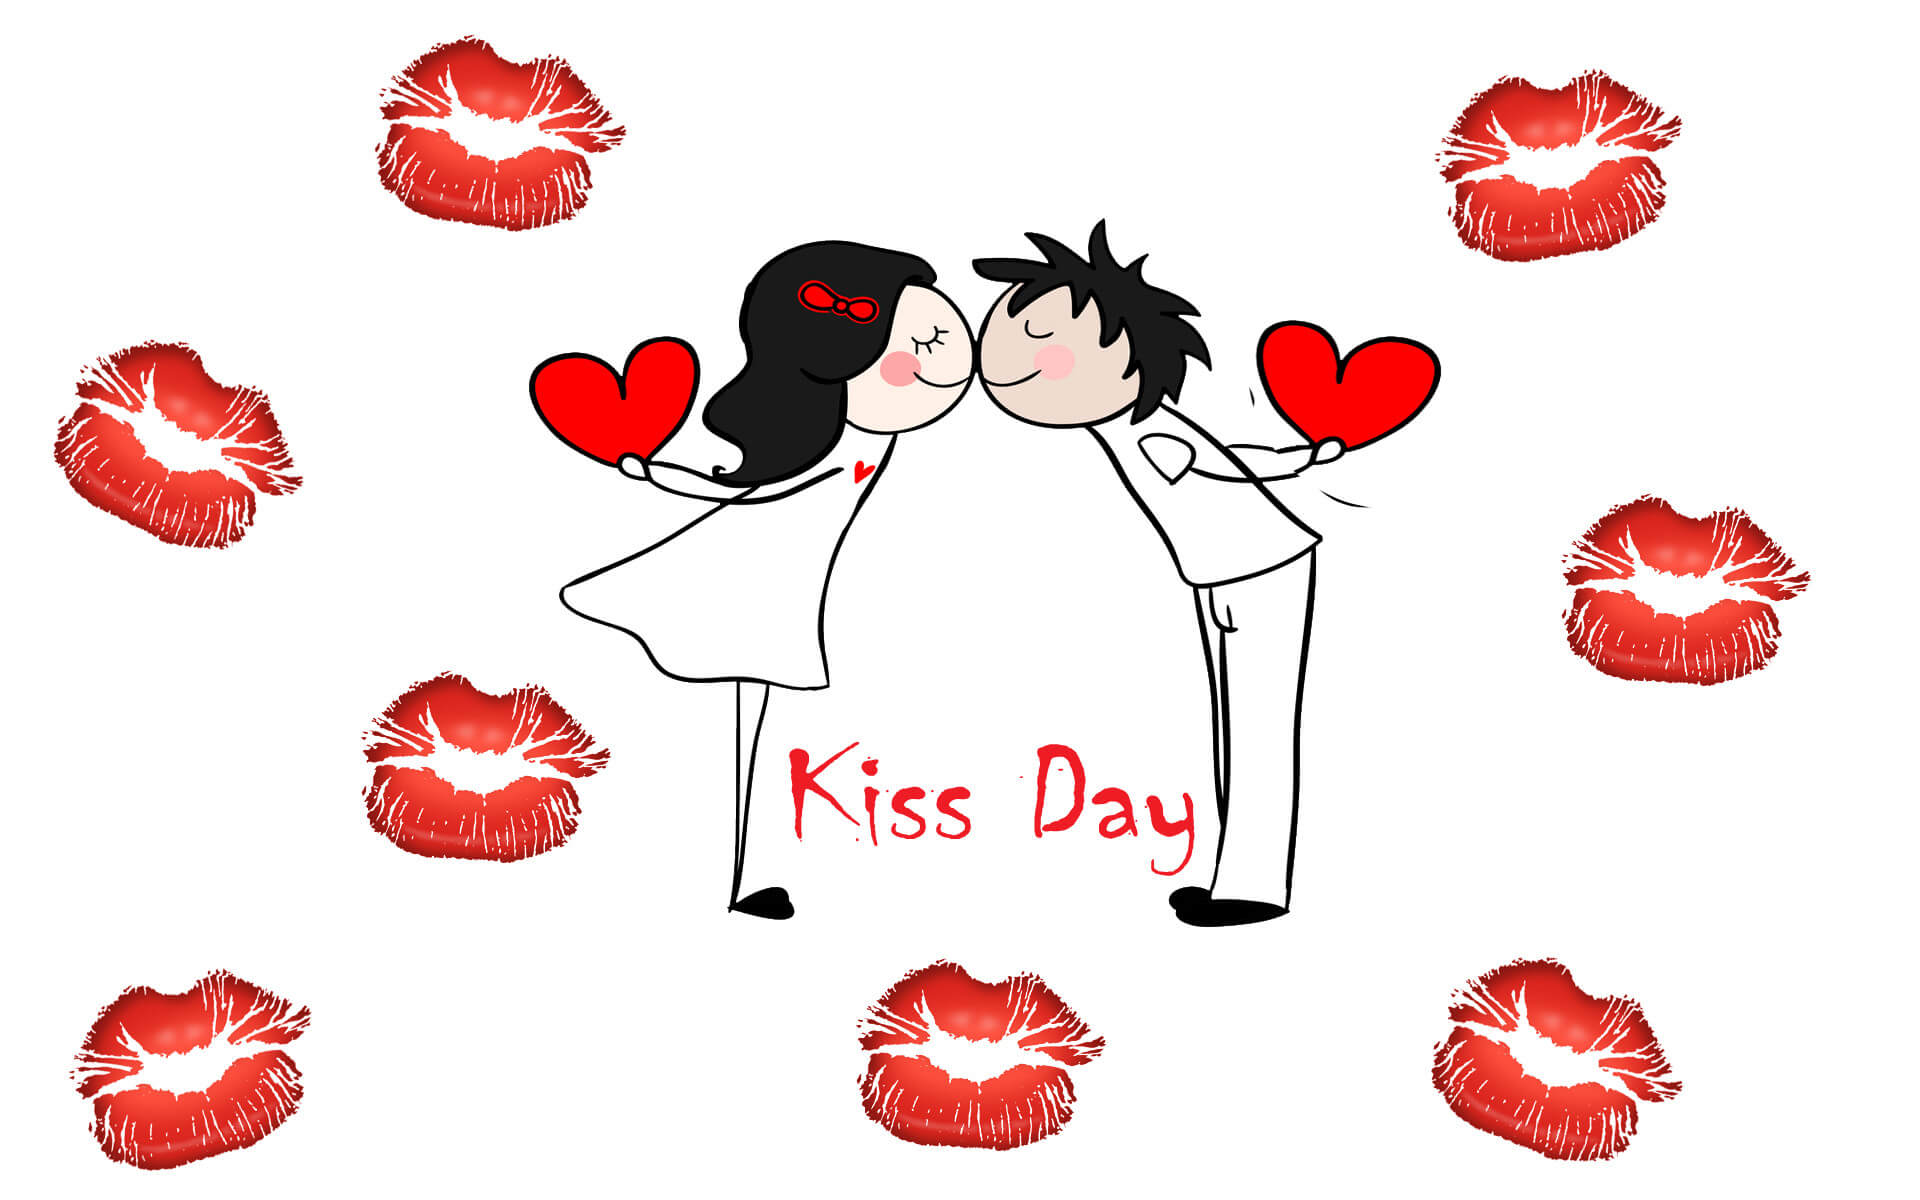 Kiss Day Wallpapers - HD WALLPAPERS